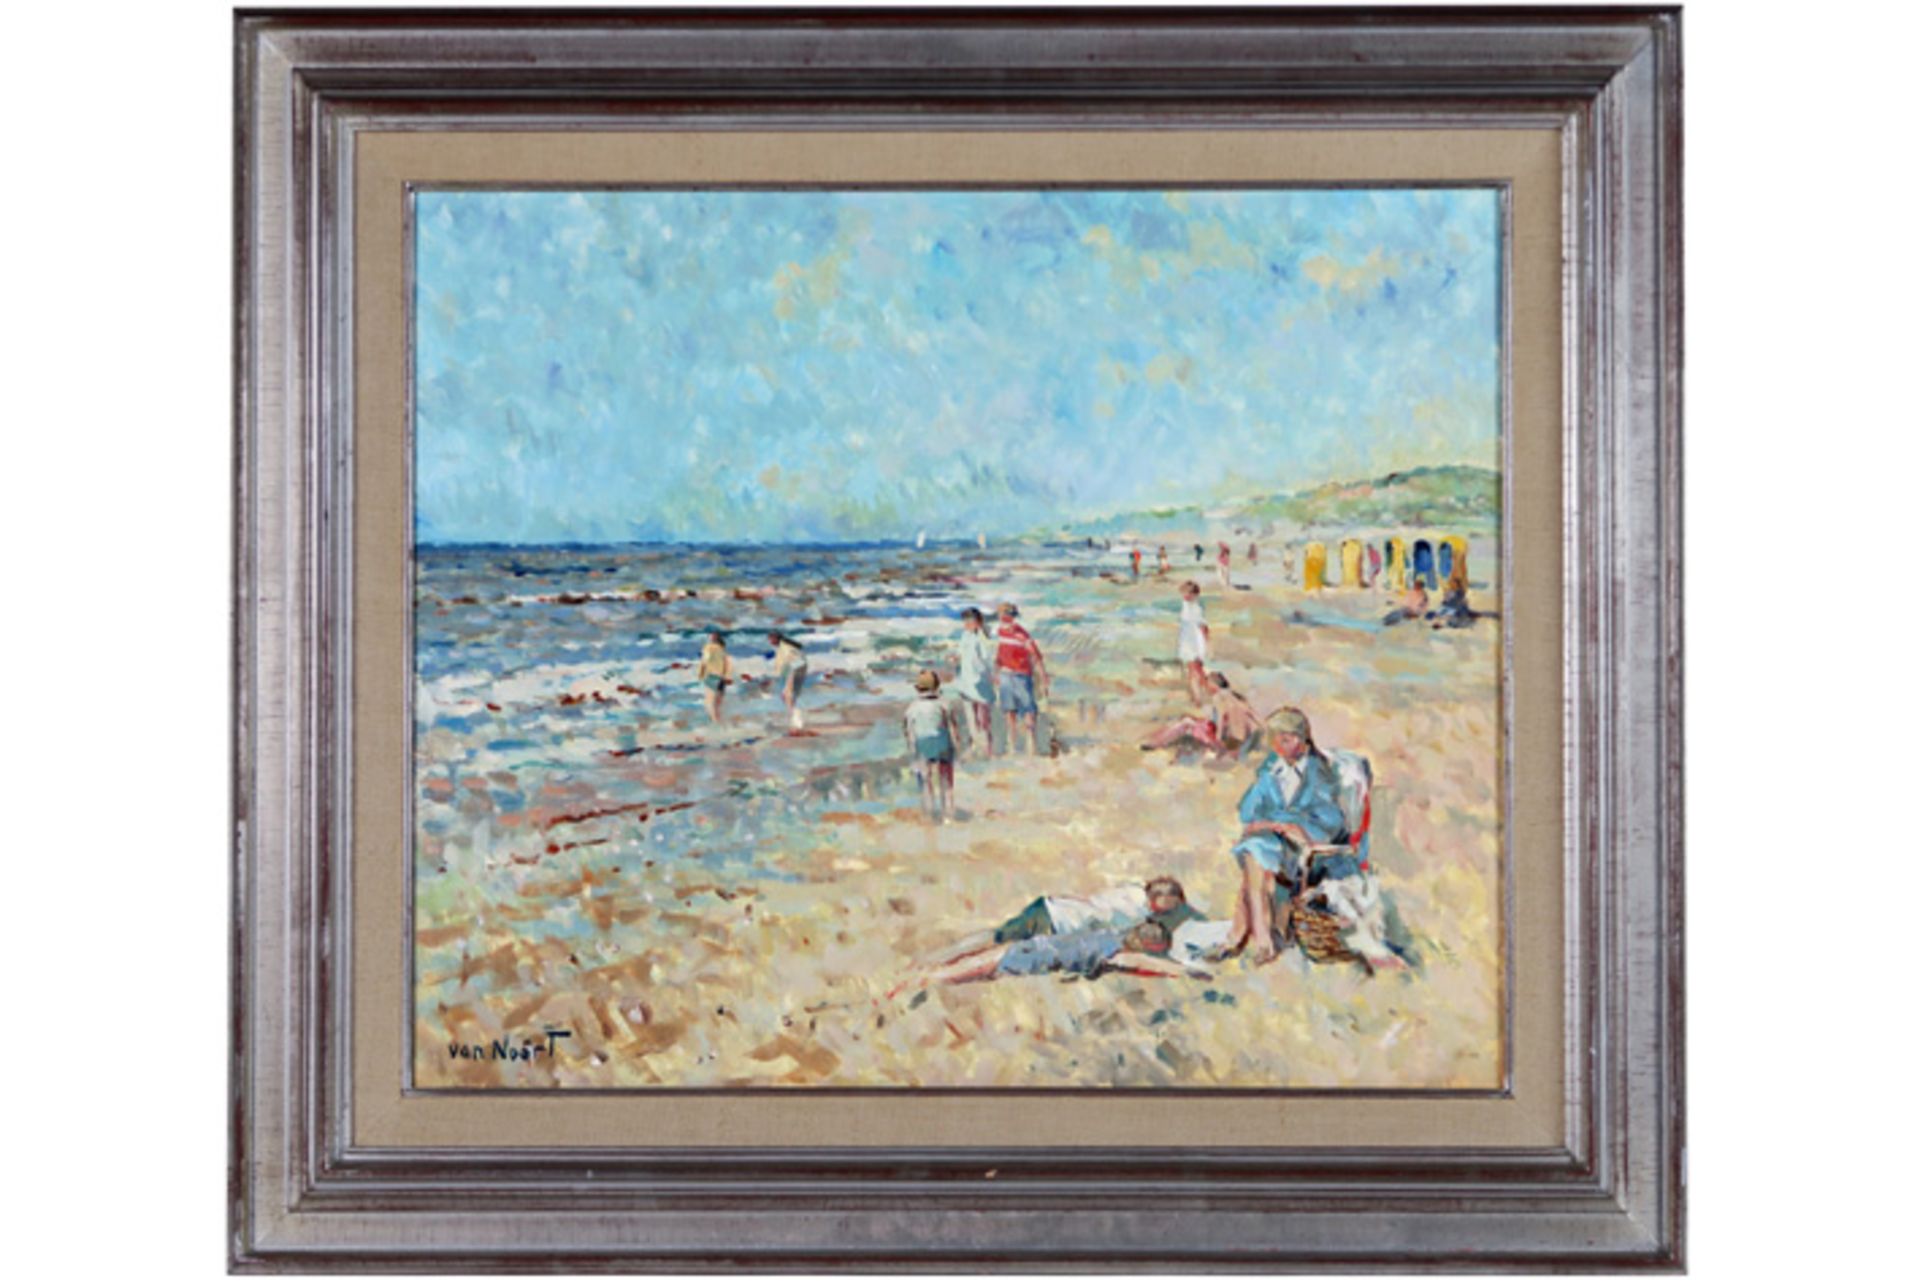 20th Cent. oil on canvas in his typical impressionistic style - signed Cornelis Van Noort Sr||VAN - Image 2 of 4